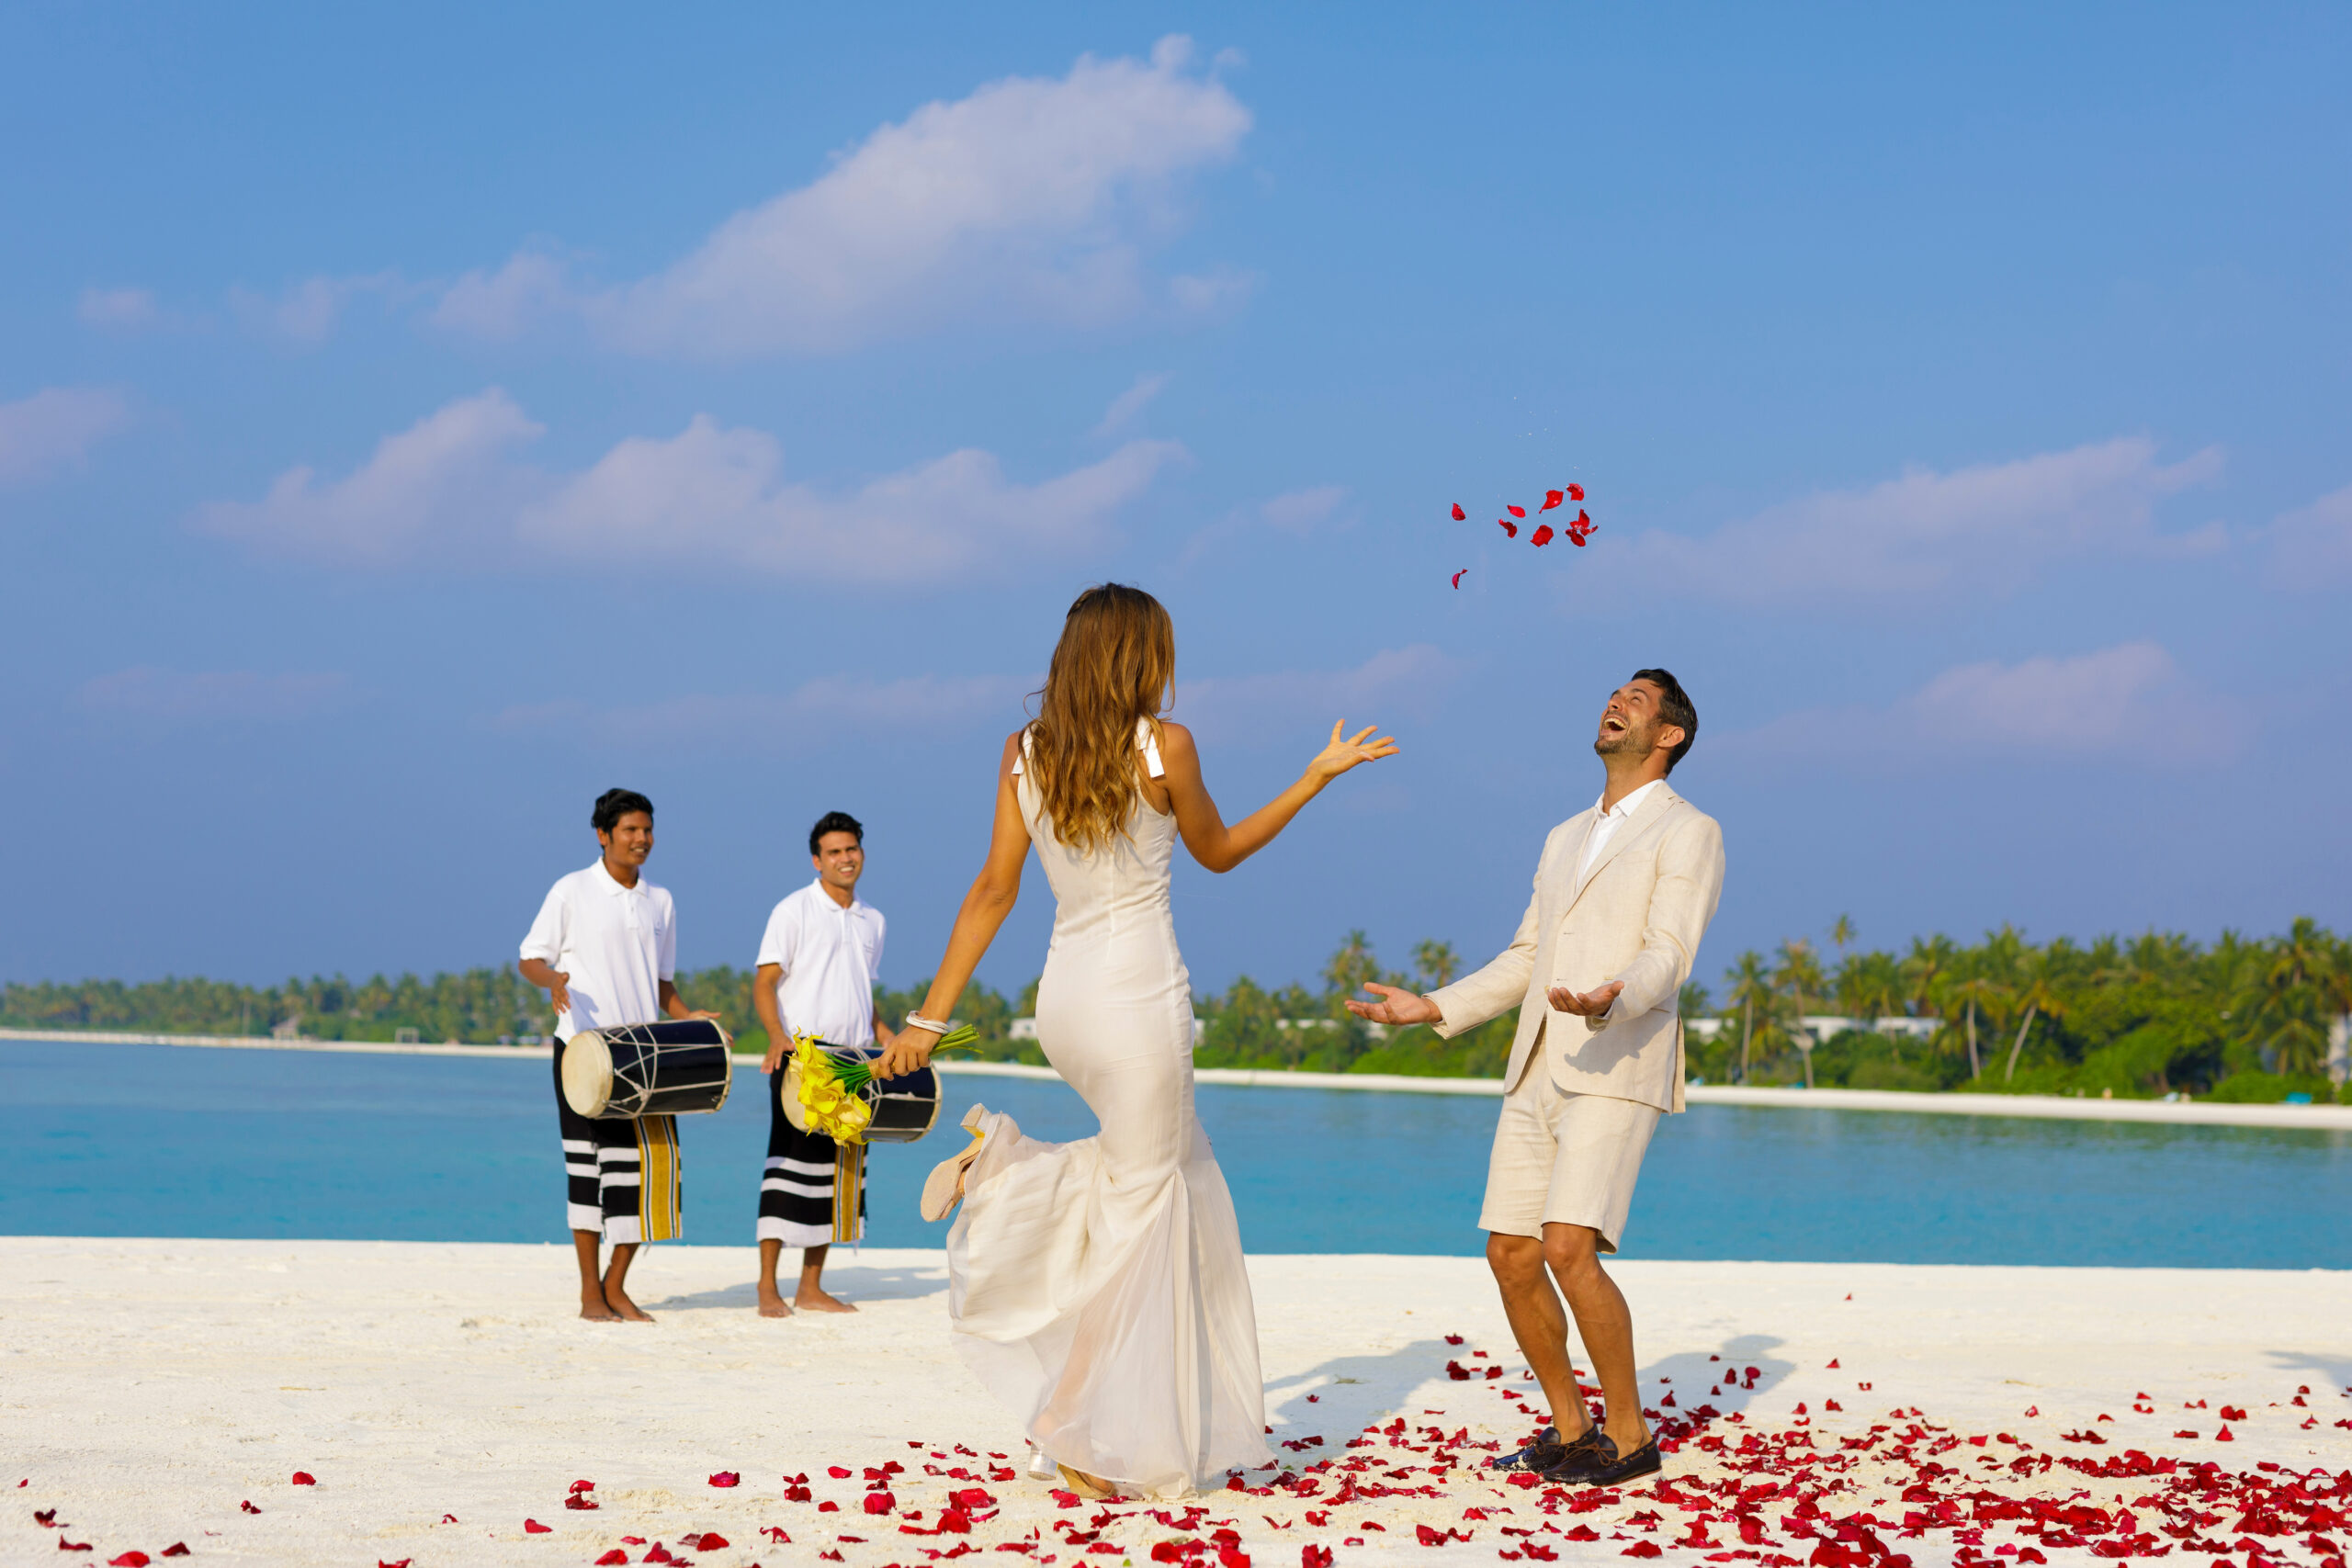 Kandima Maldives has launched the #anythingbutordinary initiative for couples to start their new lives together. The K’Krew creates incredible celebrations for customers, from unique proposal ideas, pre-wedding get-togethers and photo shoots to tailor-made (desti)nation weddings in the most Instagram-worthy settings. A secluded 3-km island surrounded by crystal clear waters and white sands, Kandima creates the ultimate experiences with a host of indulgences across extraordinary settings and picturesque locations.  Kandima takes pride in being one of the very few resorts in the Maldives where experiences are tailor-made for guests, positioning itself as the ultimate lifestyle desti(nation) in the affordable luxury segment. The island resort has successfully hosted various small to large-scale events and celebrations, including full island buyouts for weddings. From the very first moment, Kandima’s kool wedding planners will guide you through each step of the wedding planning process, ensuring a smooth and hassle-free on-ground implementation.  Various locations at Kandima allow guests to customize each celebration venue to reflect their unique style and preferences. For instance, a movable marquee setup is an excellent option for larger groups, with a maximum capacity of 120 guests, while Azure offers a combination of indoor and outdoor seating with a capacity of up to 40 guests. Forbidden Bar is great for an evening gathering with drinks and music for up to 60 guests. For bigger events, the Ken’s Cove Private Island is just 5 minutes from Kandima and can accommodate up to 500 guests. Situated at the tip of the island, Kakuni Point and Coconut Grove are popular outdoor wedding venues.   Kandima Maldives has optimal safety measures in place, and the staff takes all the necessary precautions, PCR test facilities and temperature checks are available on call. Kandima’s Medical Klinic has state-of-the-art technology and medical equipment available for guests 24x7. There are three doctors on the island, a visiting dentist and a diving safety officer. The resort’s safety programme K’OnGuard is run by an internationally trained health and safety manager. Additional procedures cover the safety and wellbeing requirements across all contact points, including transfers, public areas, restaurants and kitchens, bars, rooms, activities, the spa and fitness centre, and all back-of-house operations.   Thanks and regards